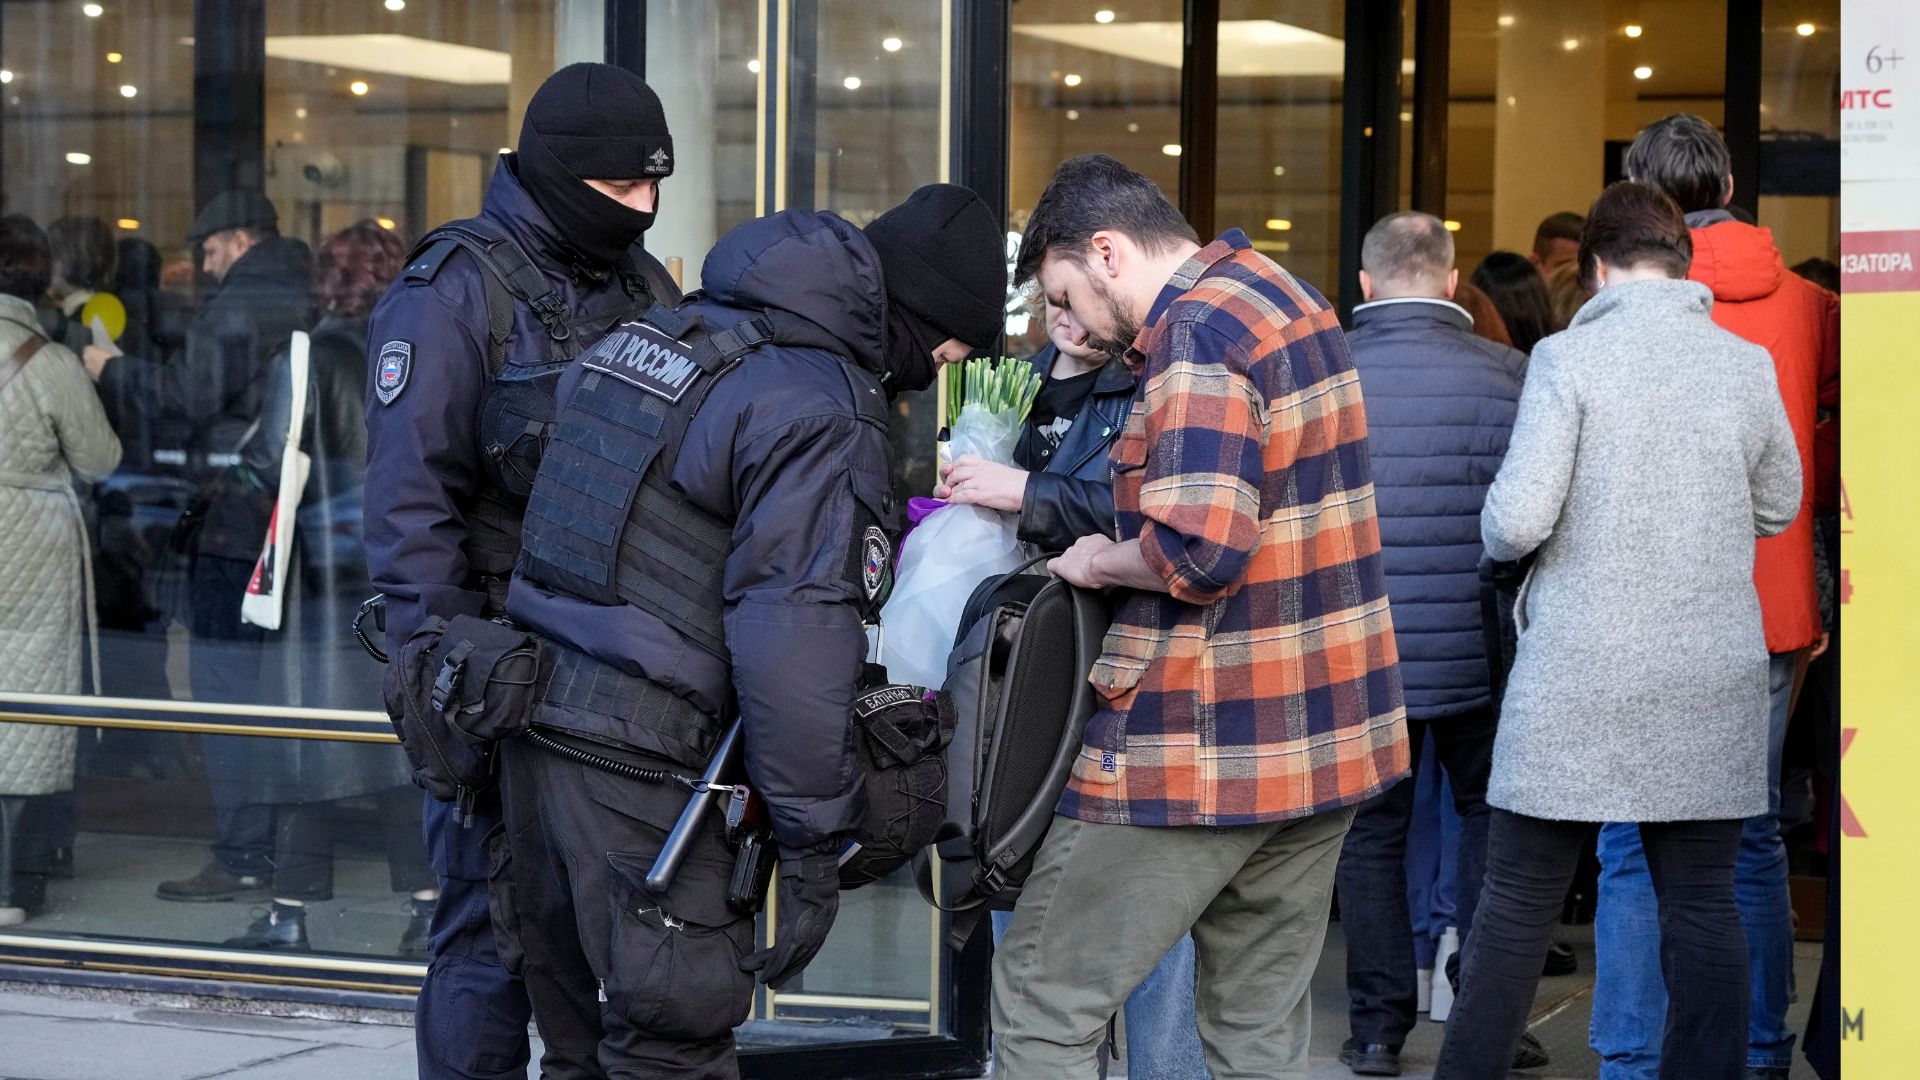 Riot police inspect bags as people gather for a memorial concert in honor of the Crocus attack victims. /Dmitri Lovetsky/AP